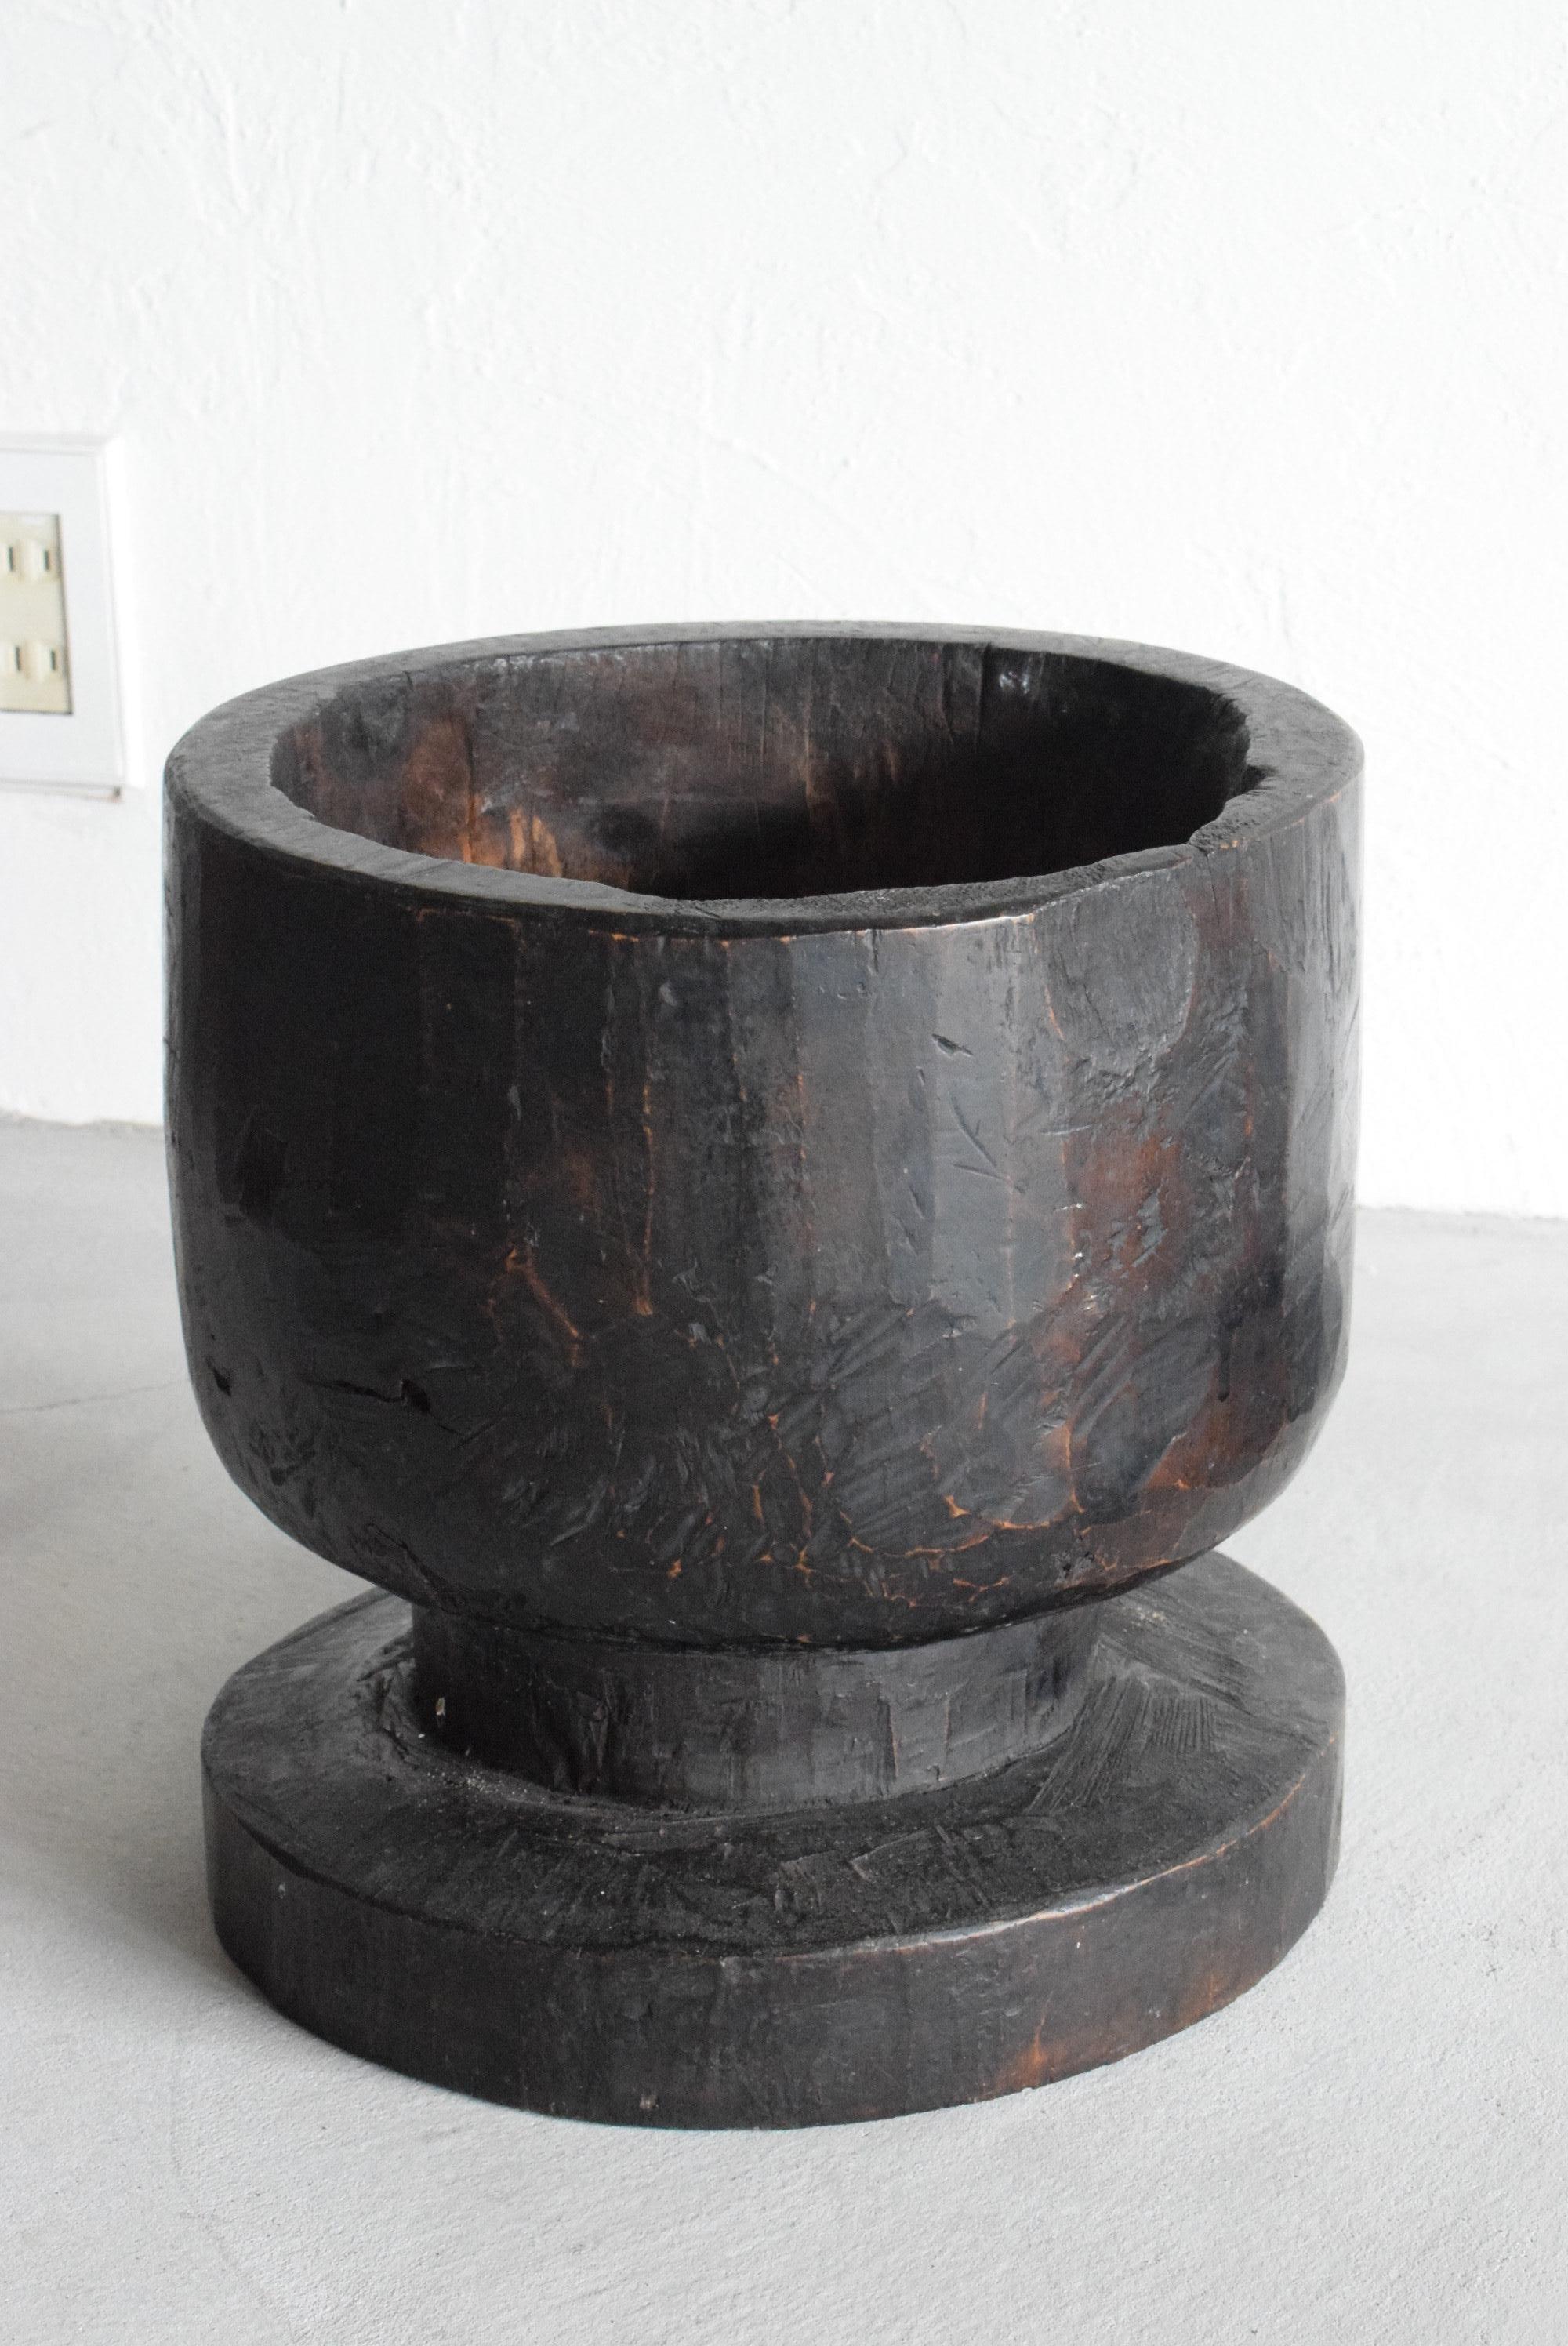 Japanese Antique Wooden Mortar 1860s-1900s/Plant Cover Wabi-Sabi Object Mingei For Sale 8